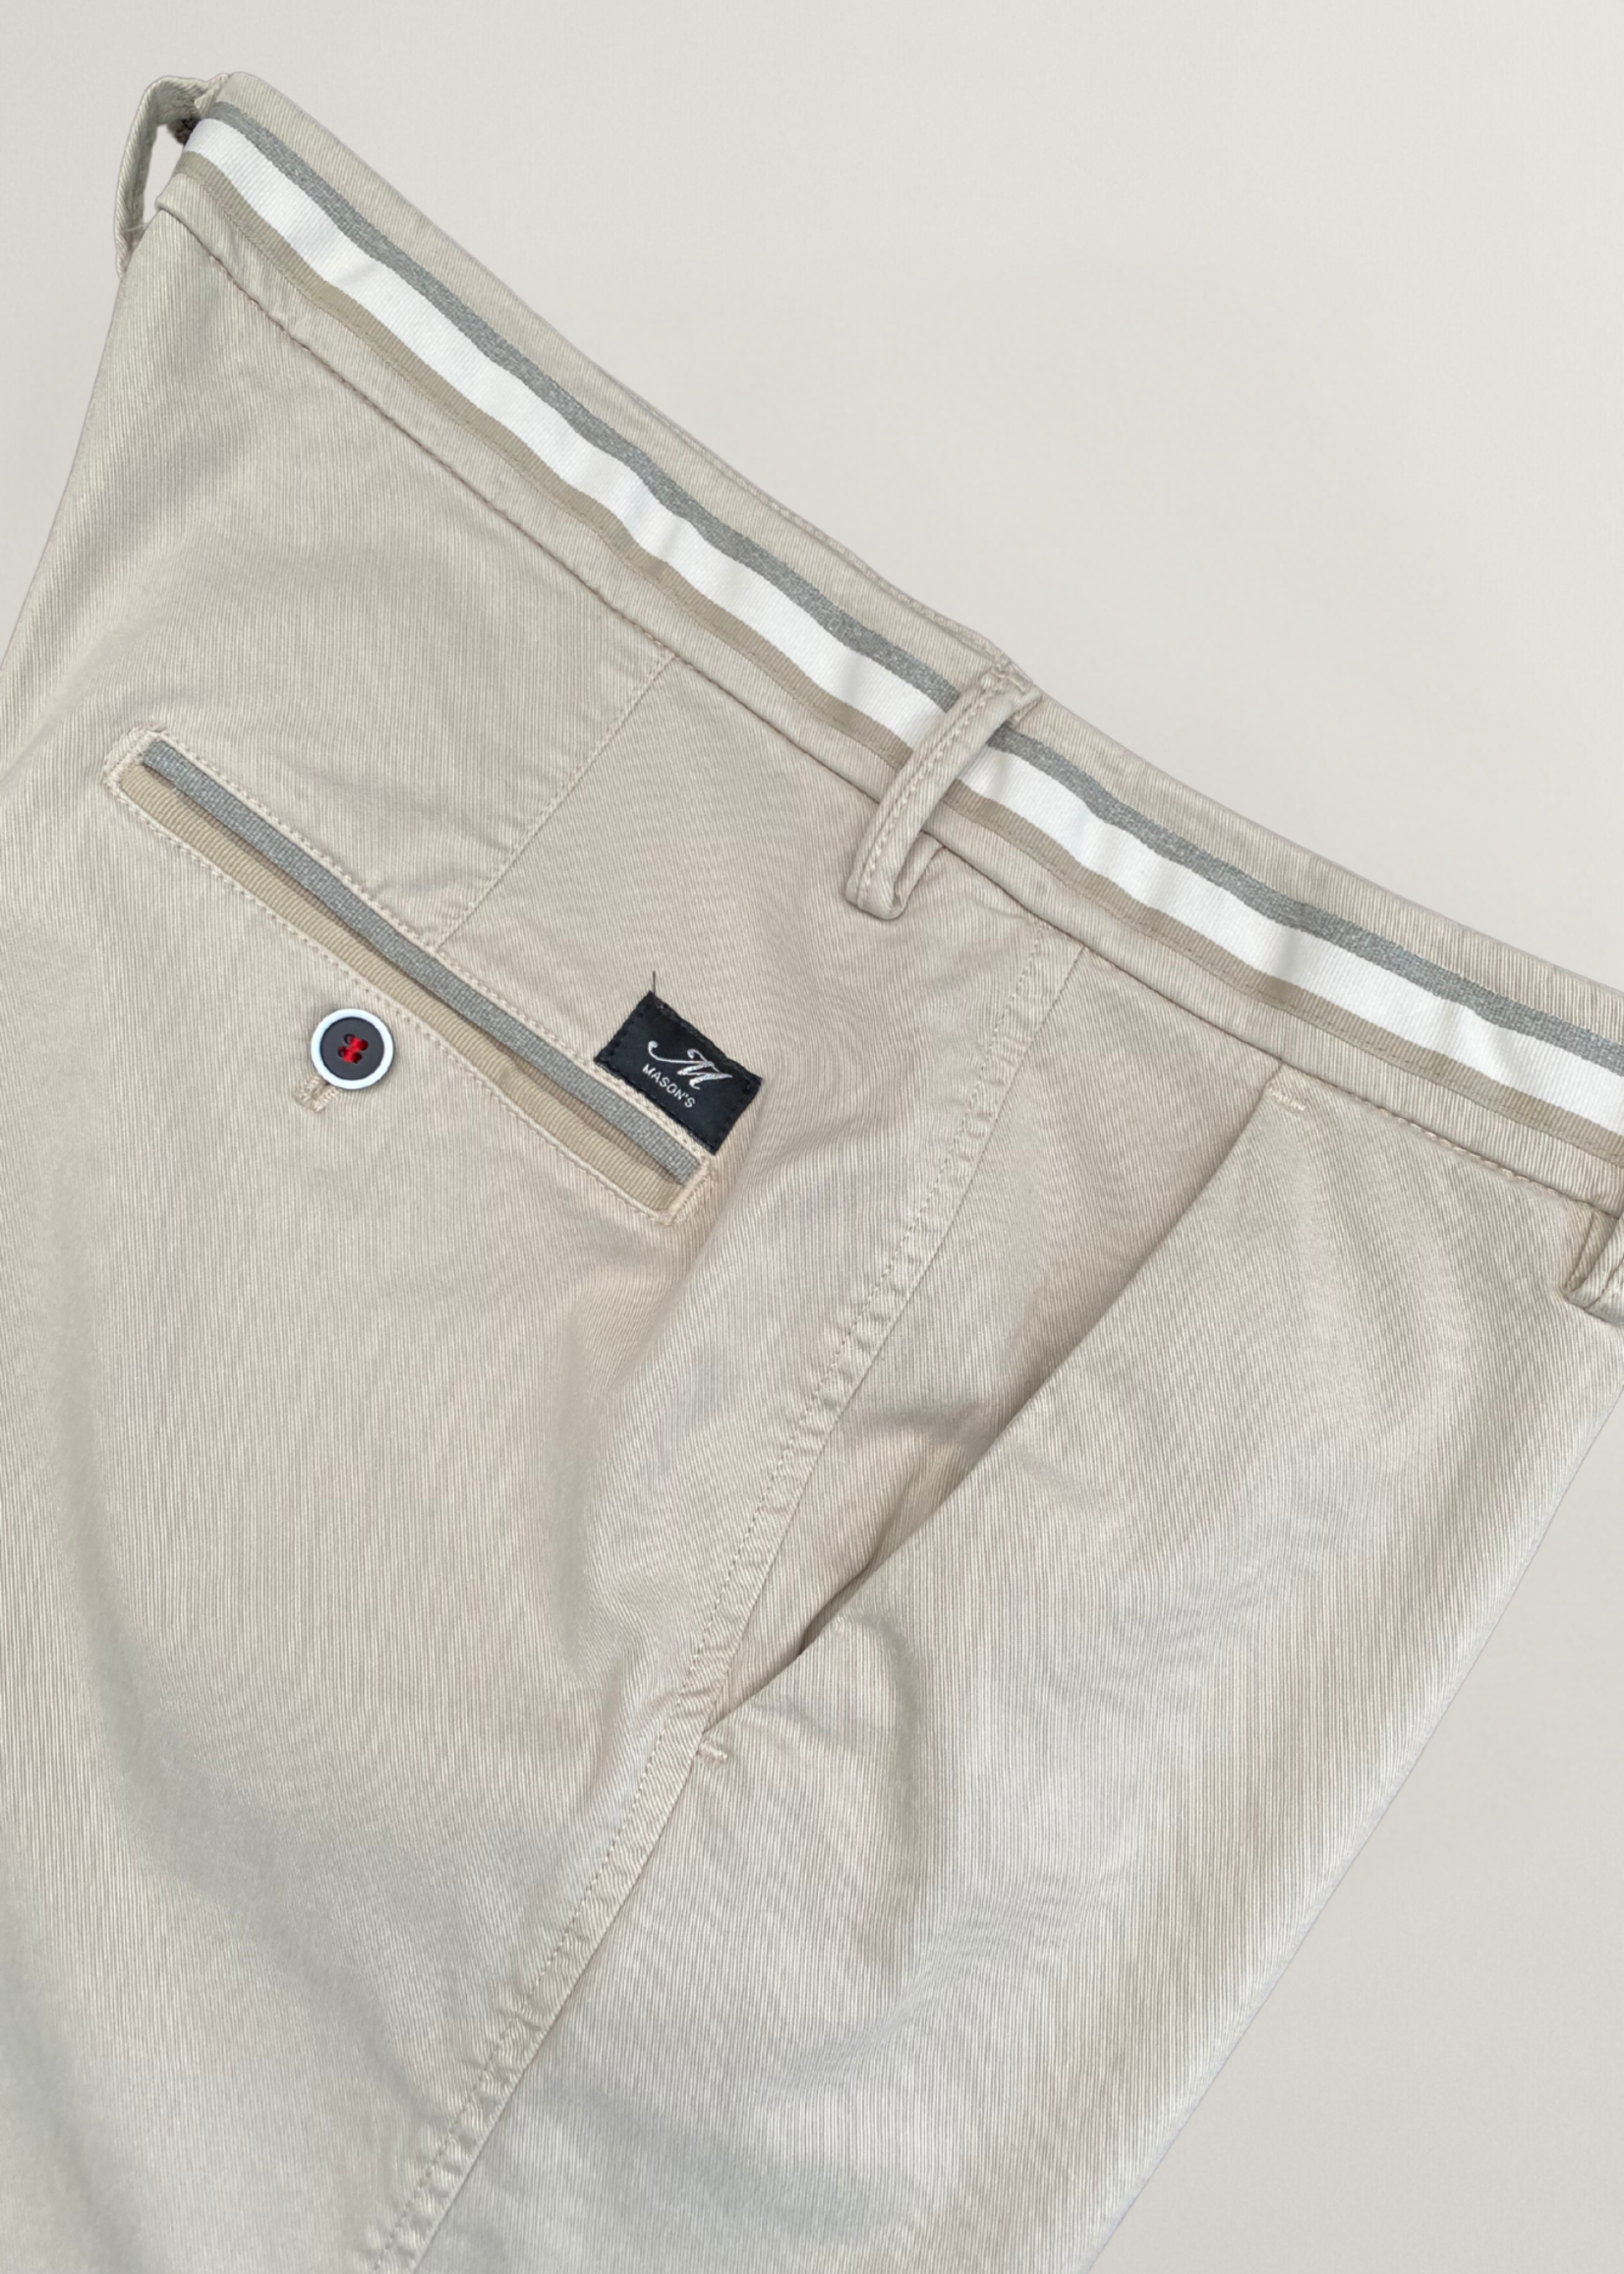 MASON'S Torino Summer men's chino pants in cotton and tencel with ribbons slim - Beige